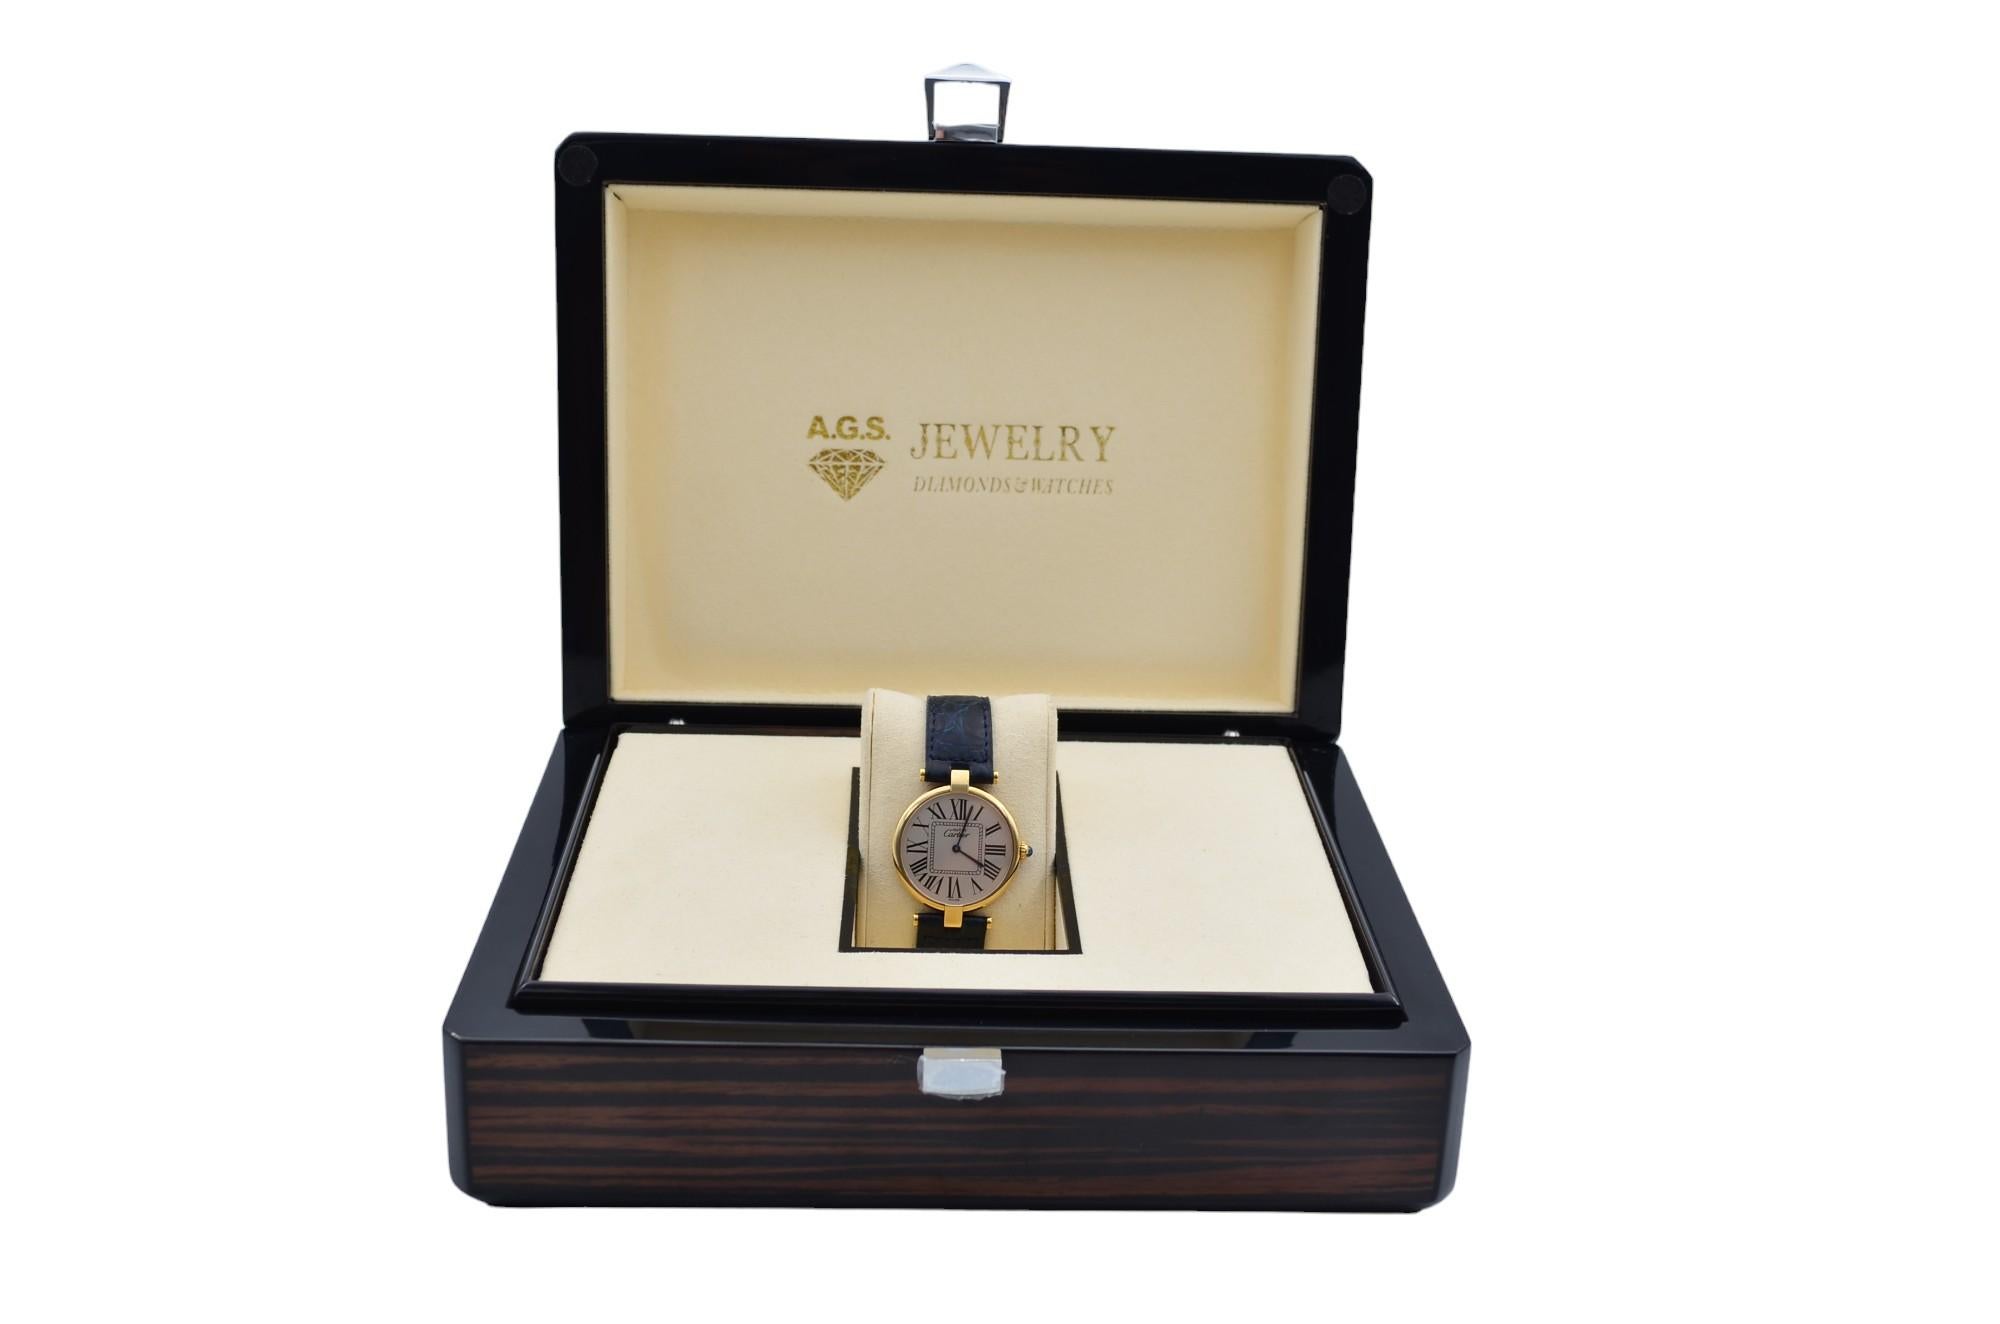 The watch is in a very good condition and it’s working well. The total length of the bracelet (case+bracelet) is 17cm. It shows slight signs of wear. The watch comes with an AGS Jewelry wooden box, along with an AGS Jewelry warranty card. For more